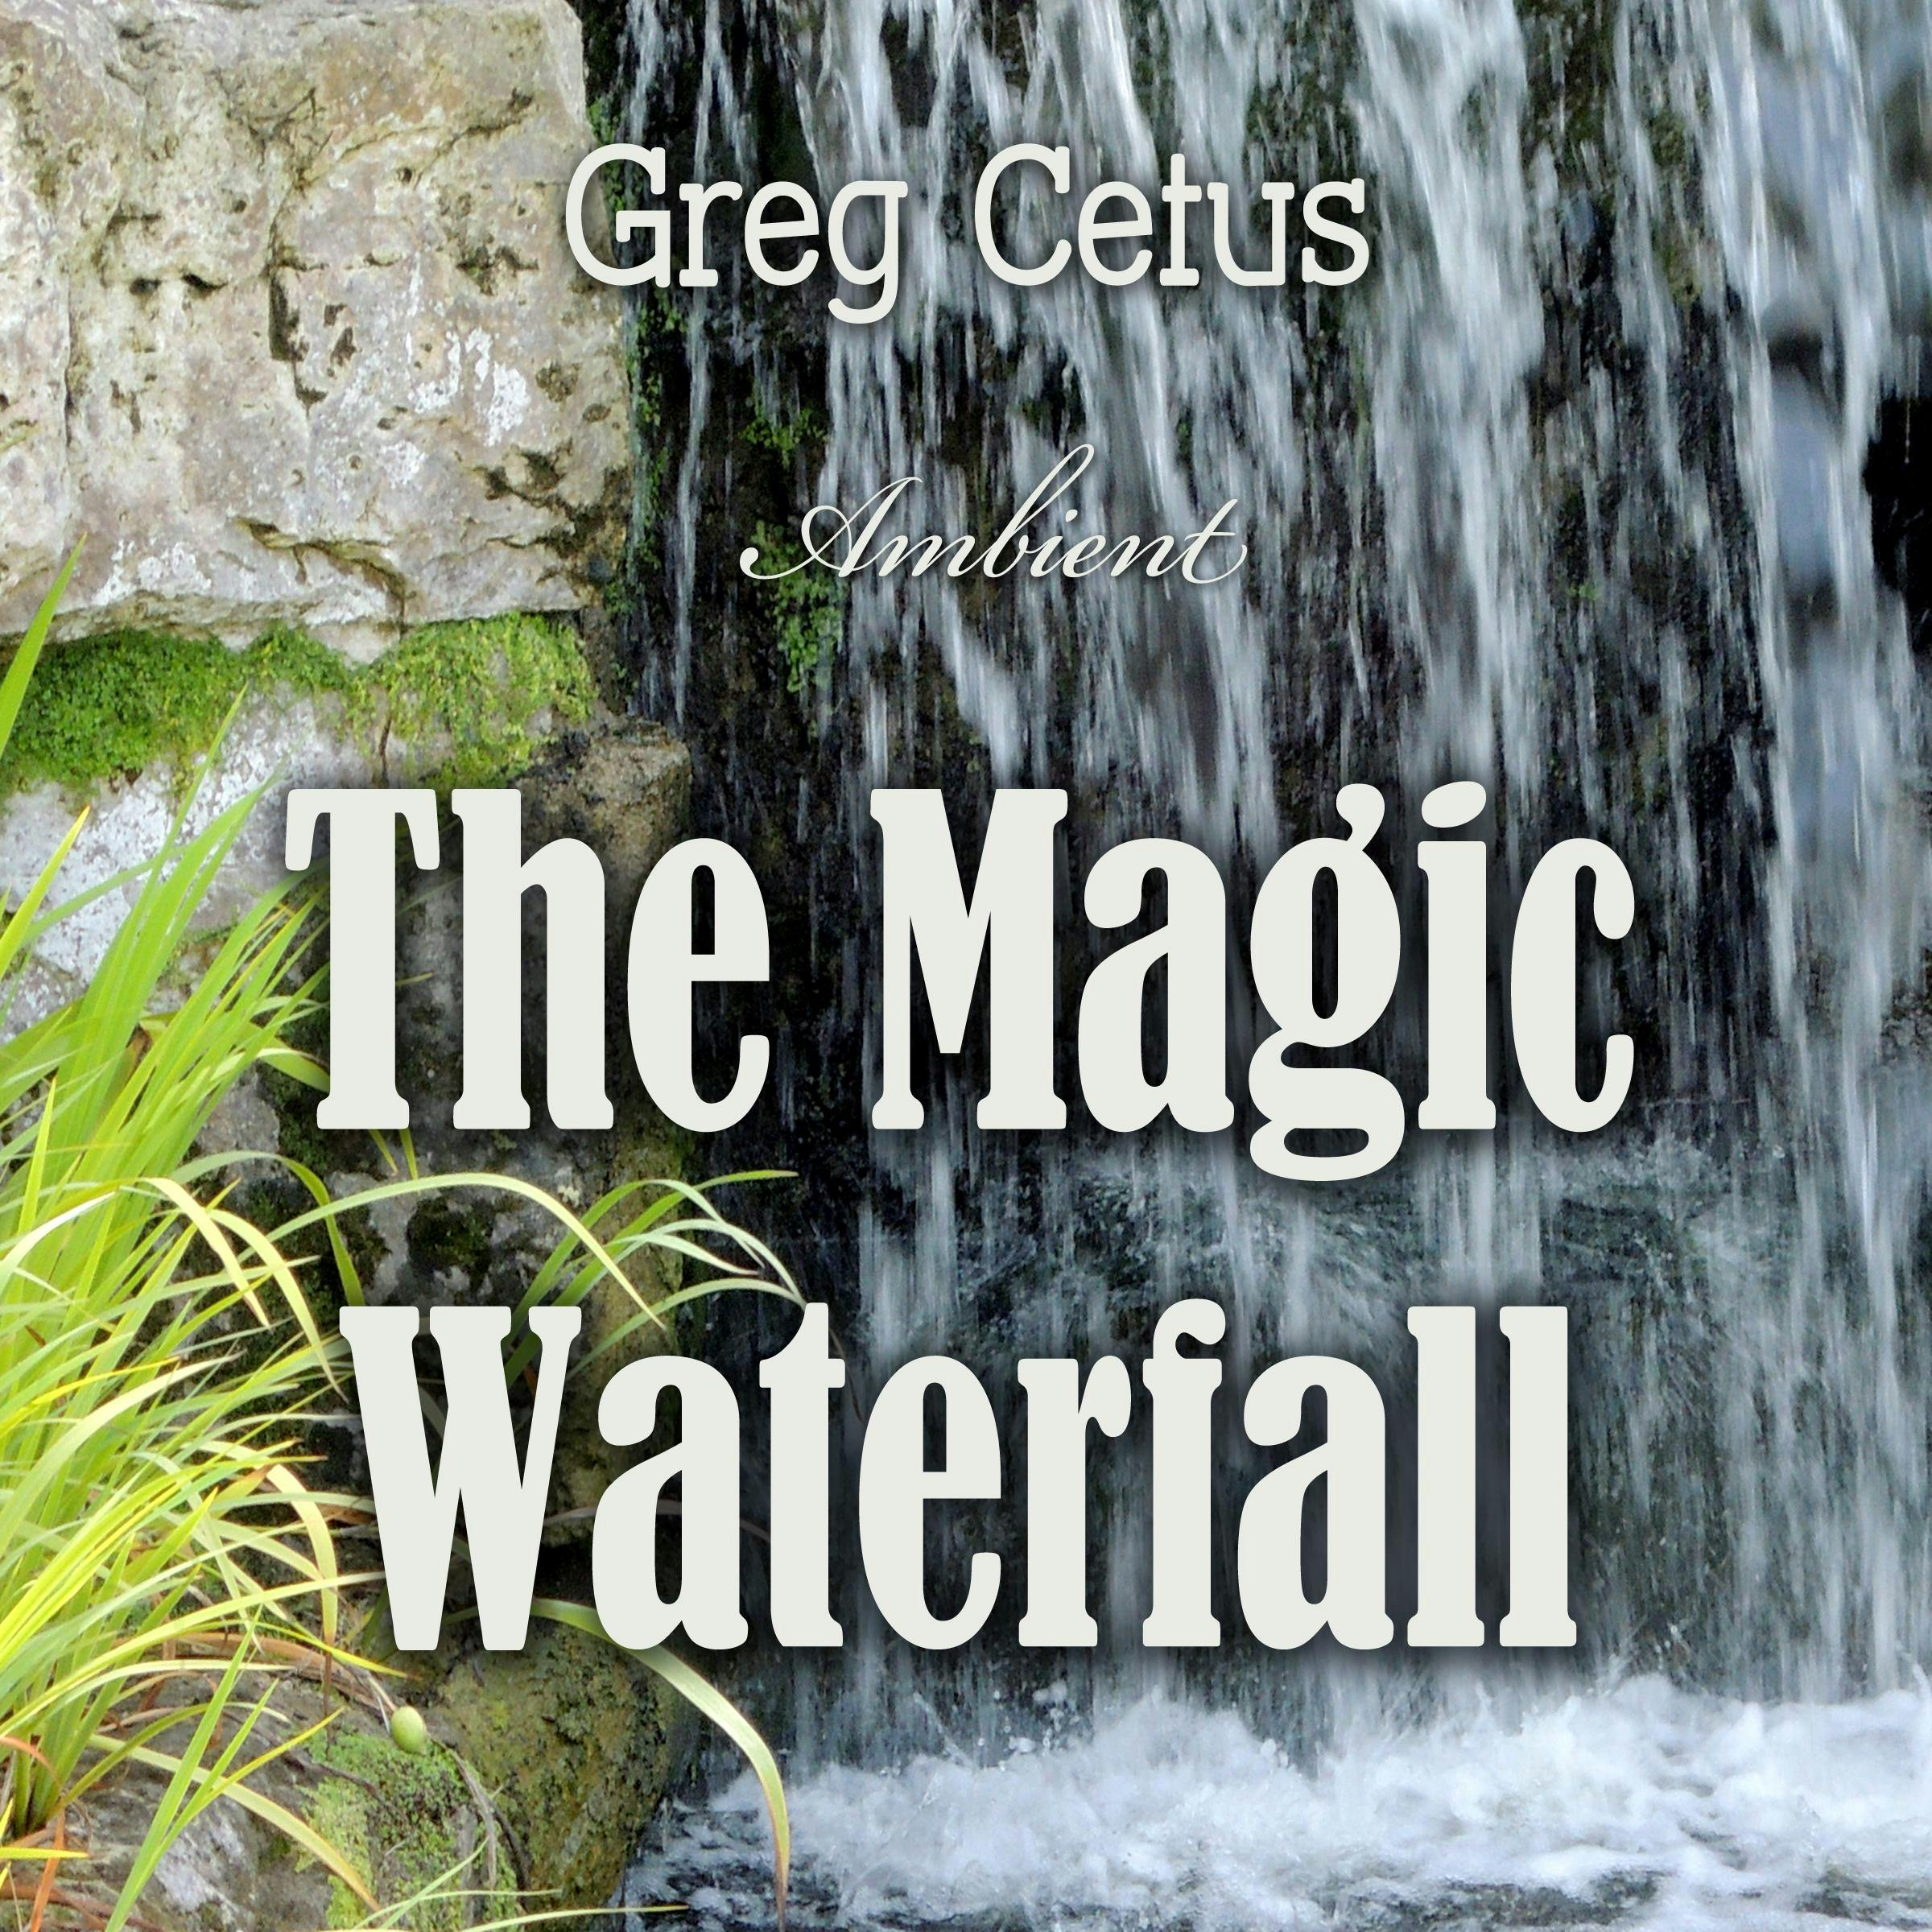 The Magic Waterfall: Ambient Sound for Mindfulness and Focus - undefined